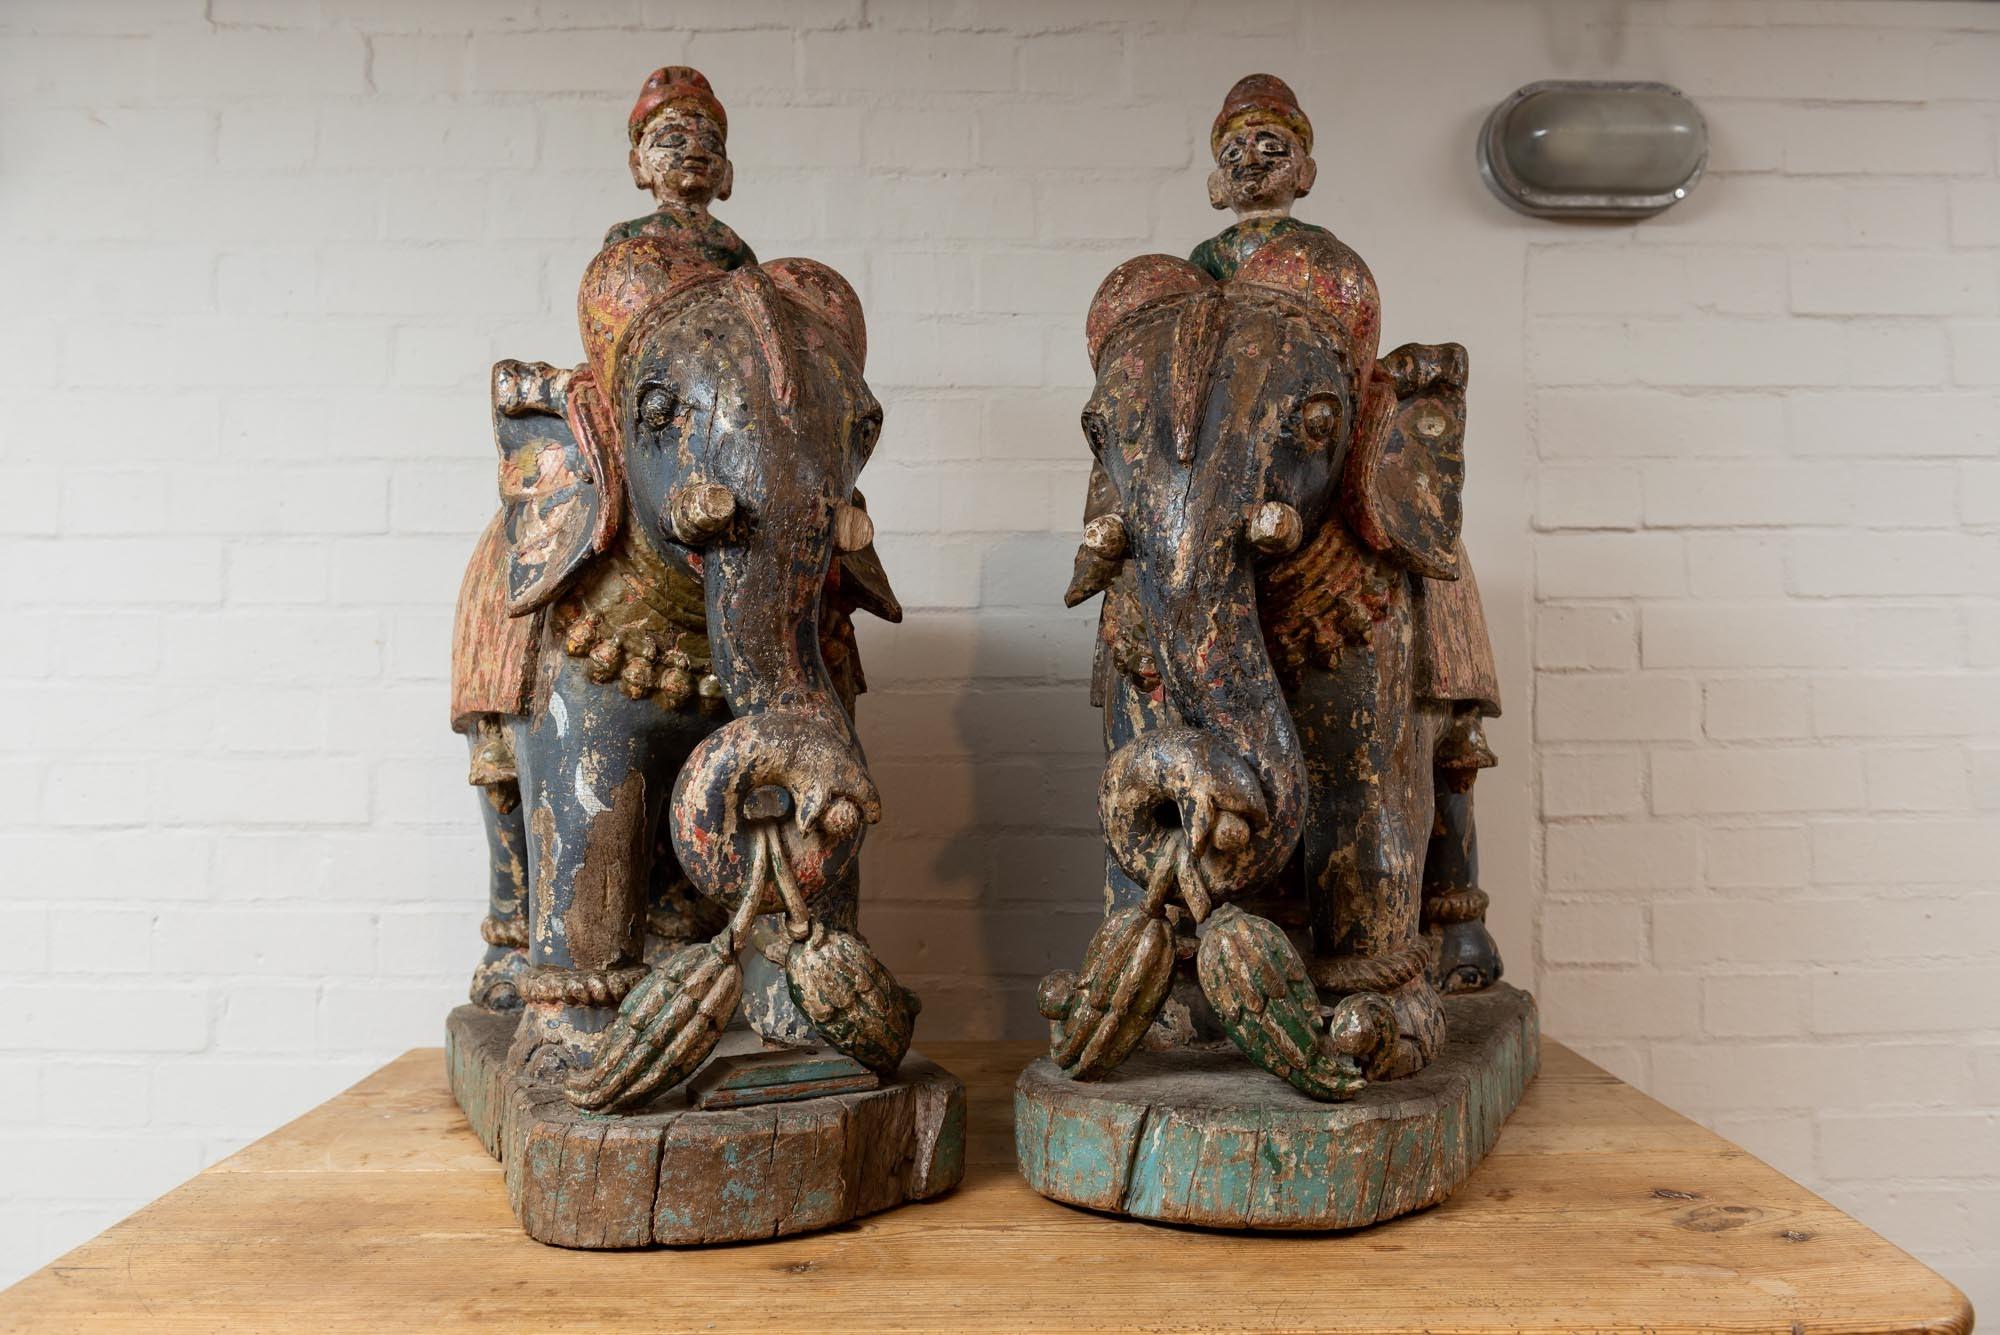 A pair of 19th century wooden elephants from the Rajasthan area in India with their original paint and vibrant colors. Originally they would have stood outside of a home by the front door.